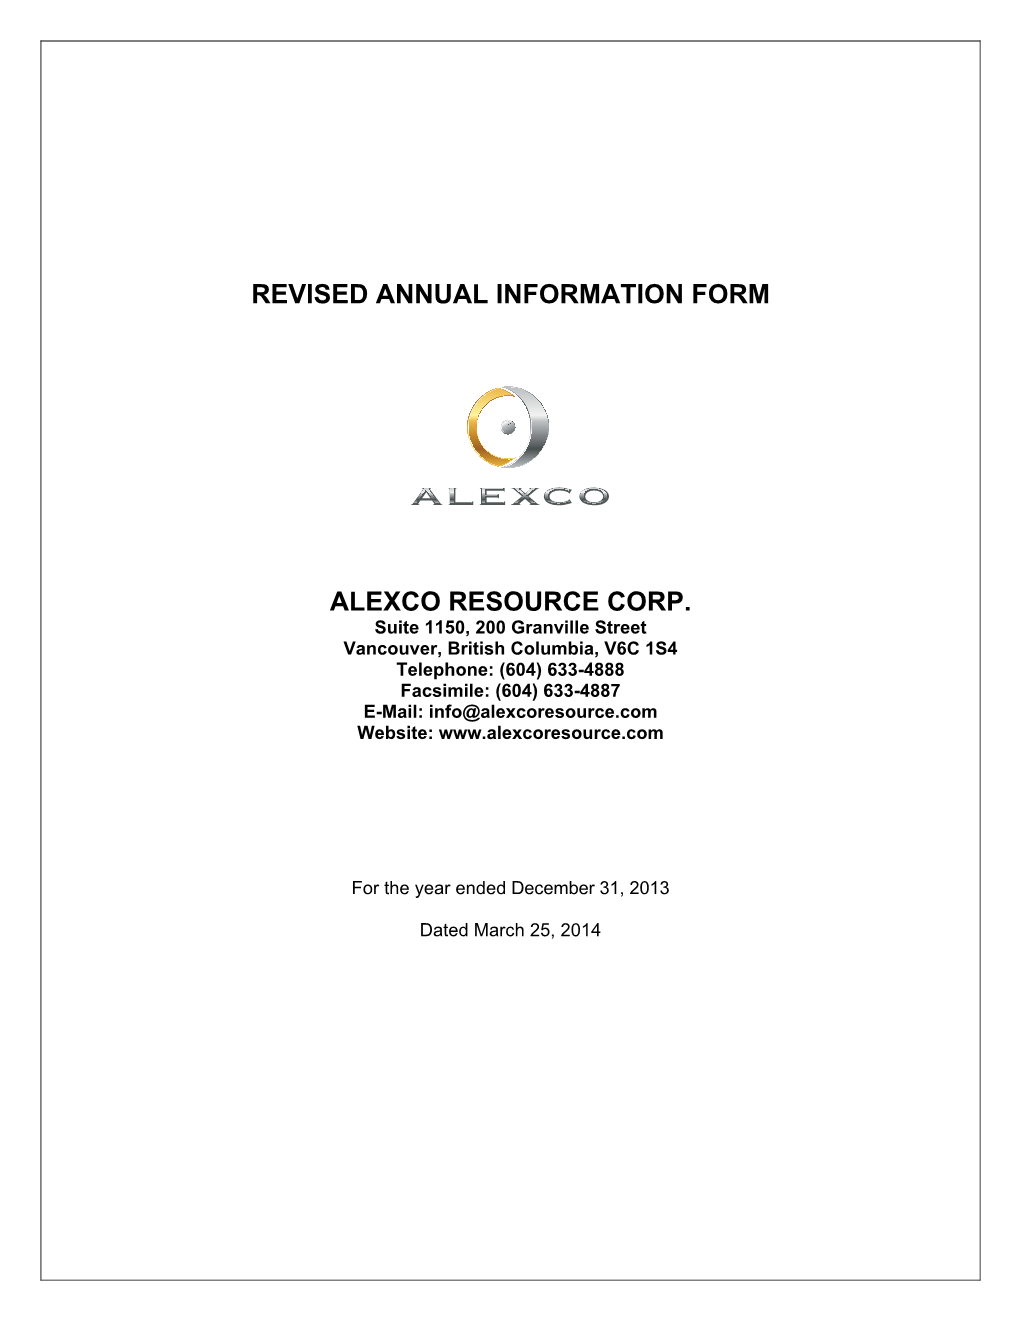 Revised Annual Information Form Alexco Resource Corp